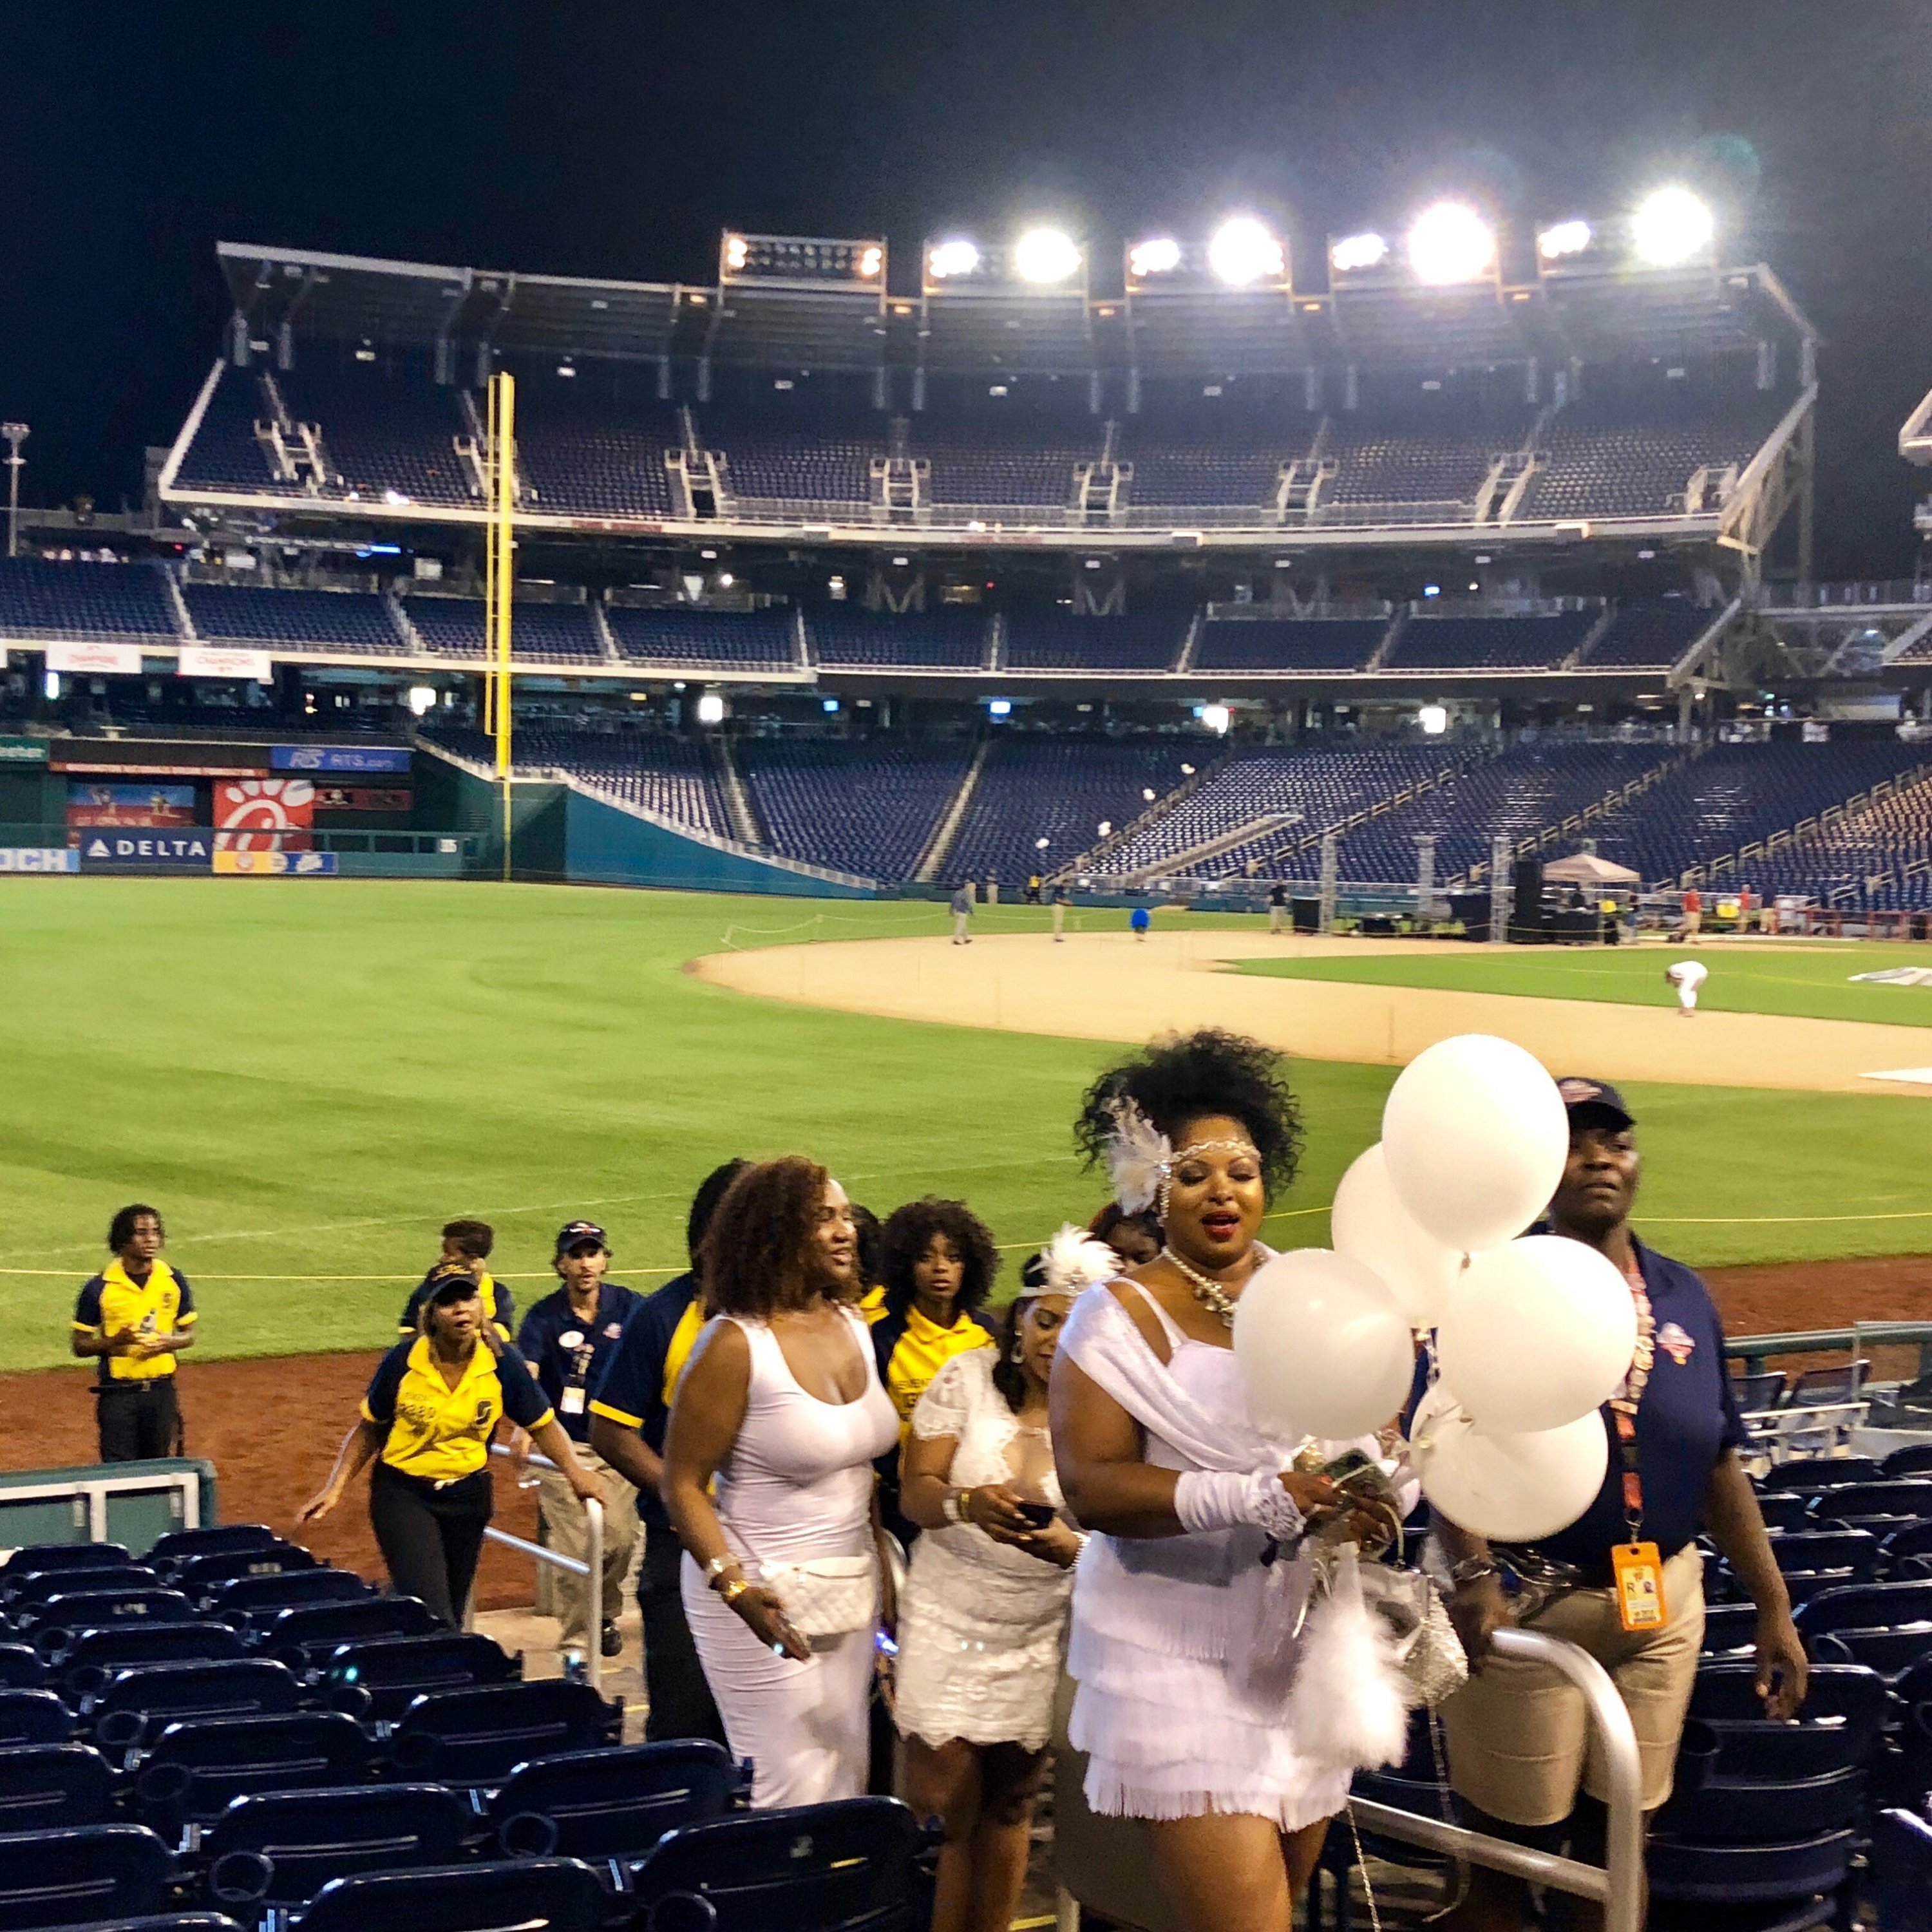 DC Diner en Blanc 2018. Photo by Evy Mages. 